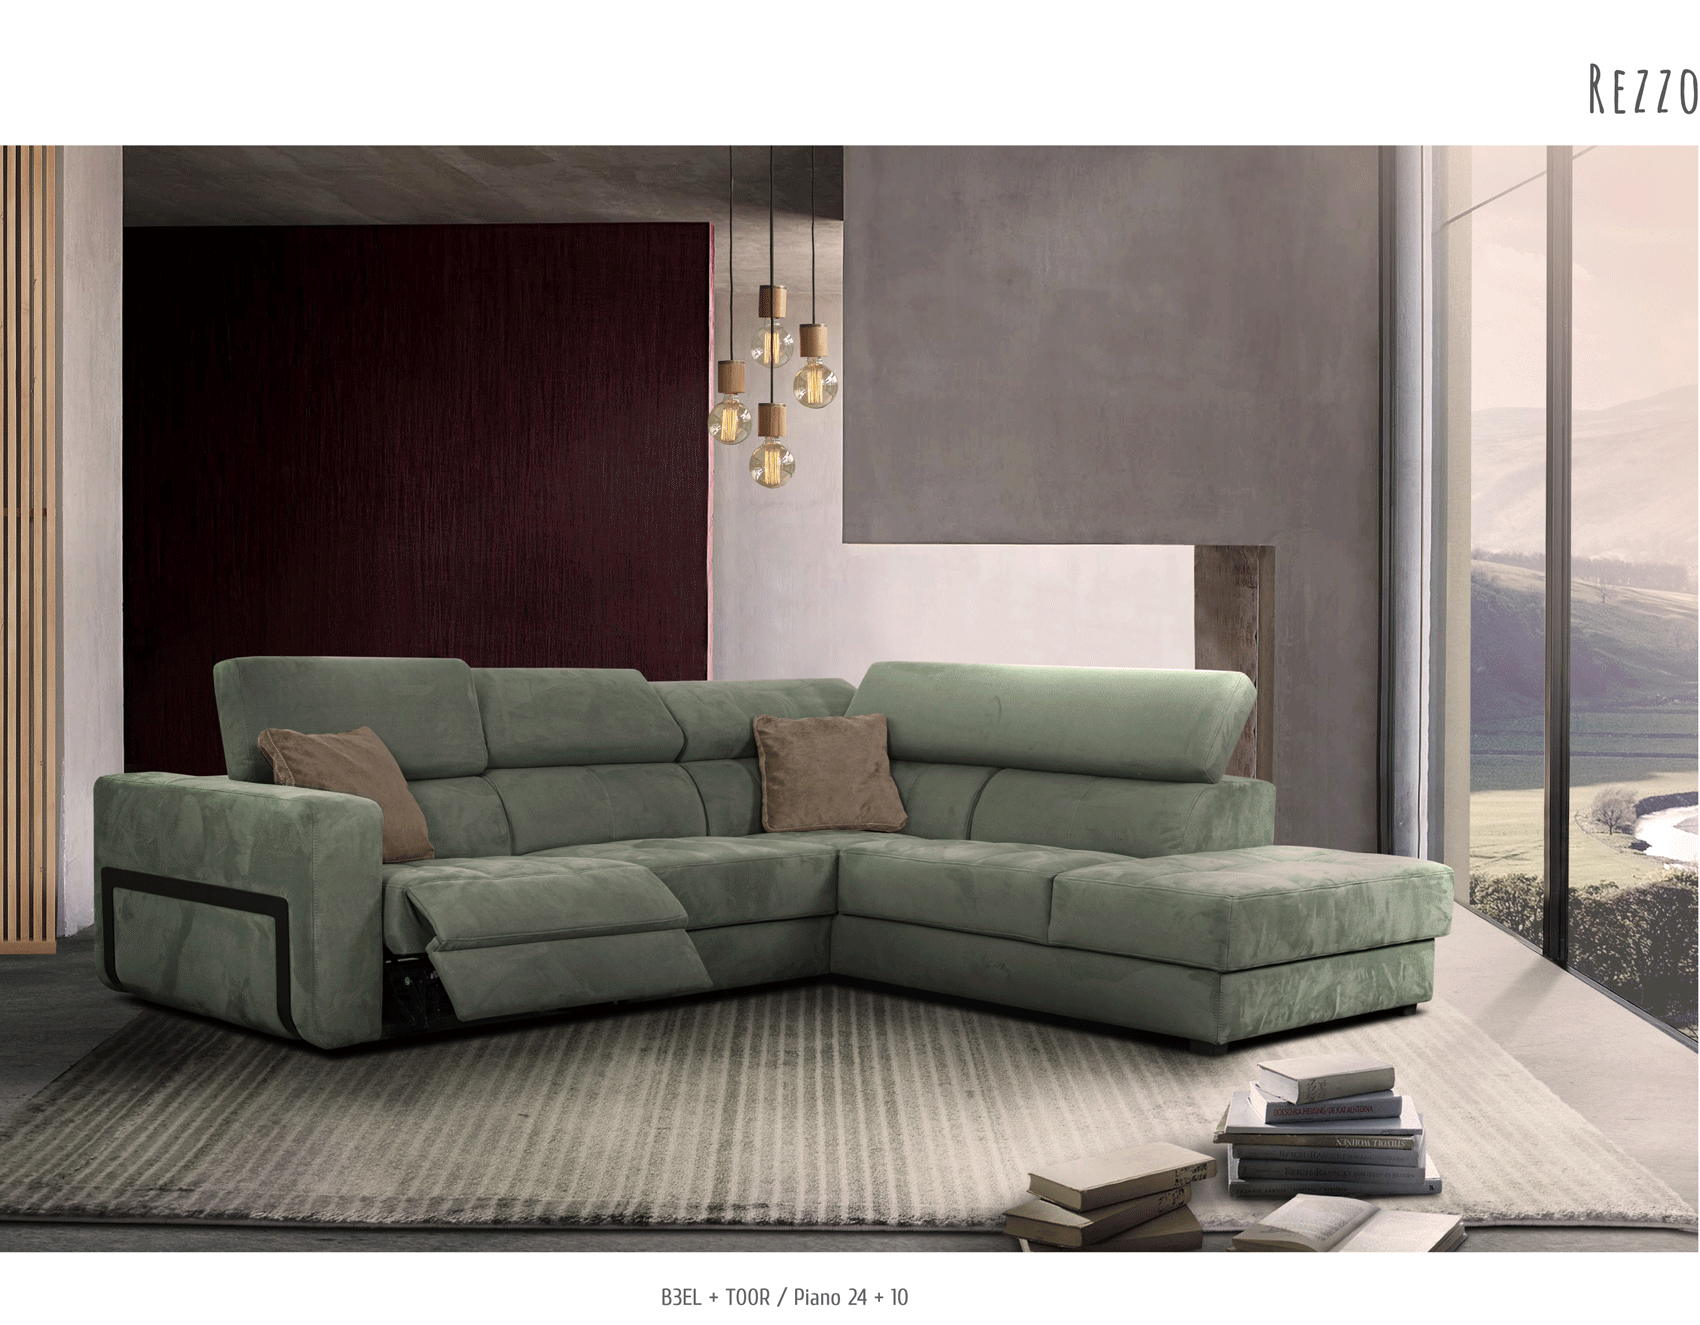 Living Room Furniture Reclining and Sliding Seats Sets Rezzo Sectional w/Recliner